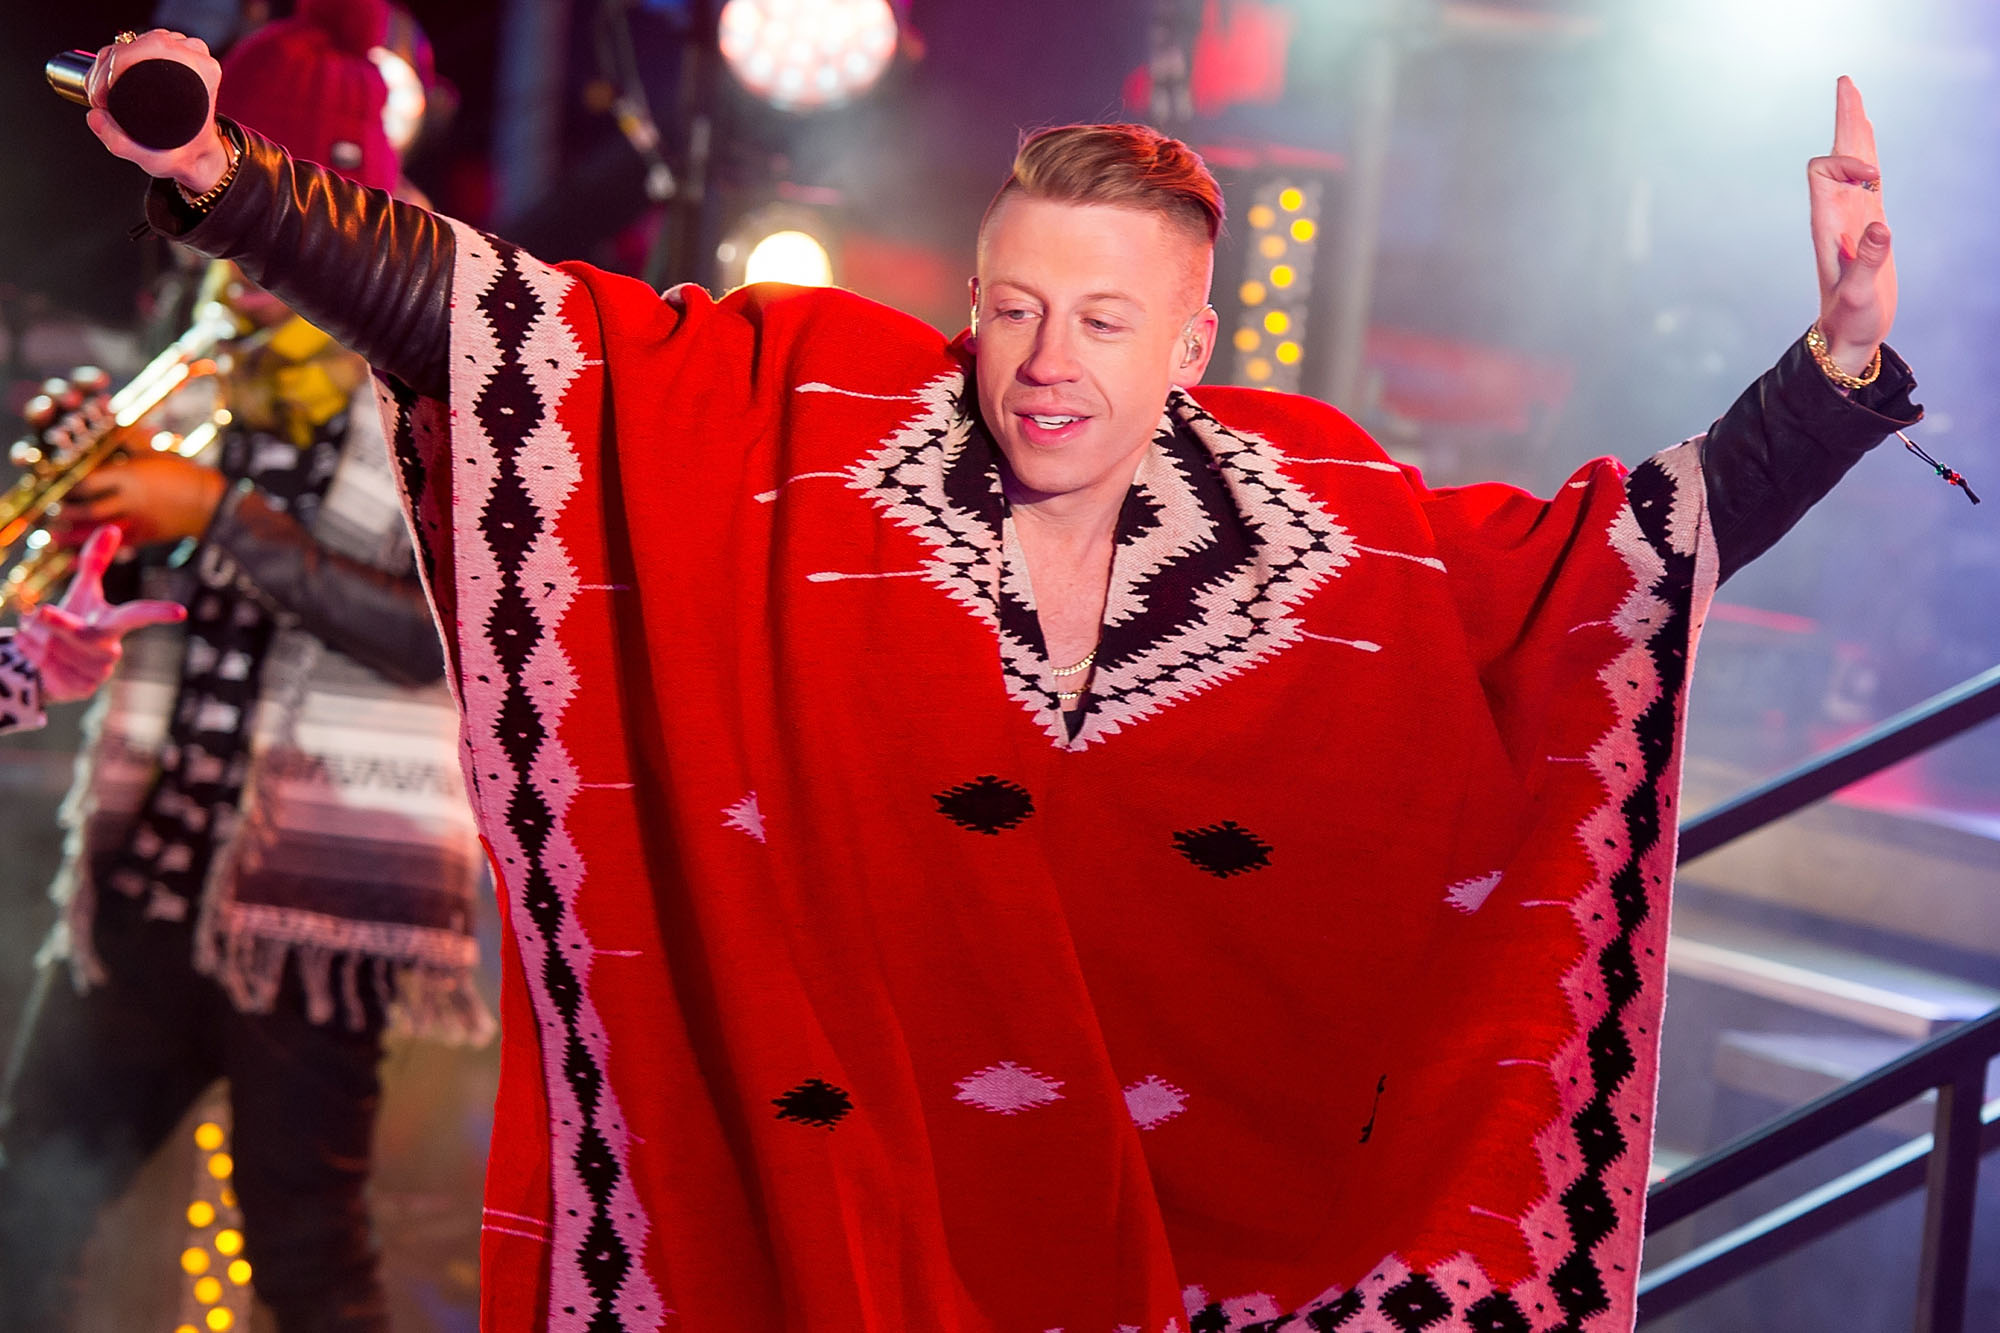 Macklemore performs at Dick Clark's New Year's Rockin' Eve Photo: Michael Stewart/WireImage